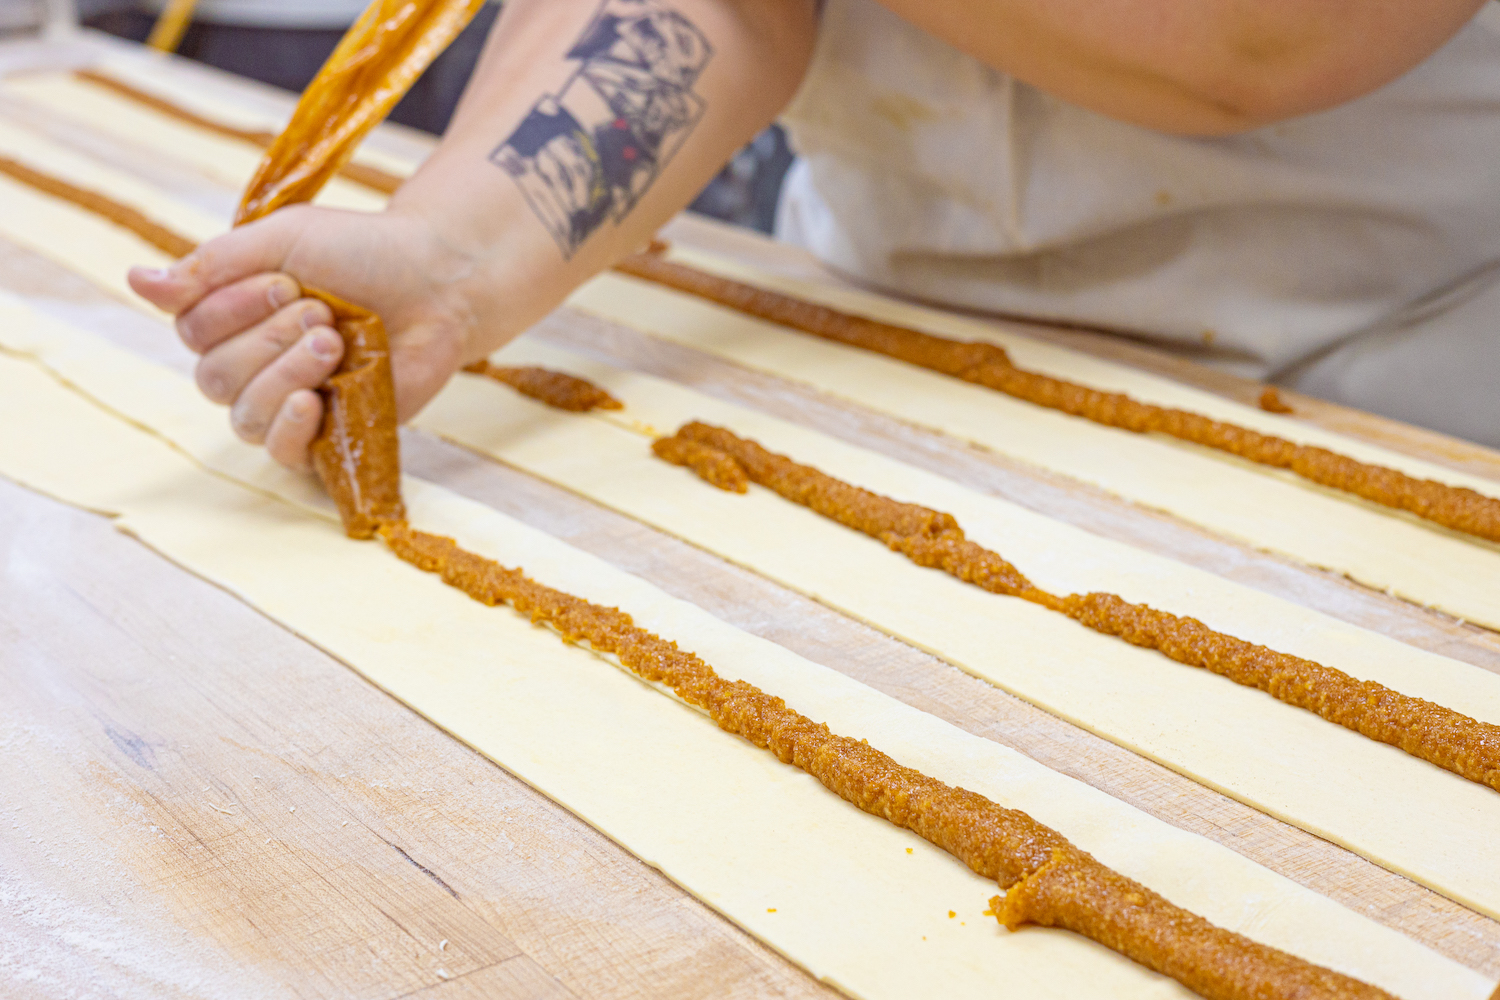 A hand is seen piping apricot rugelach filling onto long, flat sheets of dough.